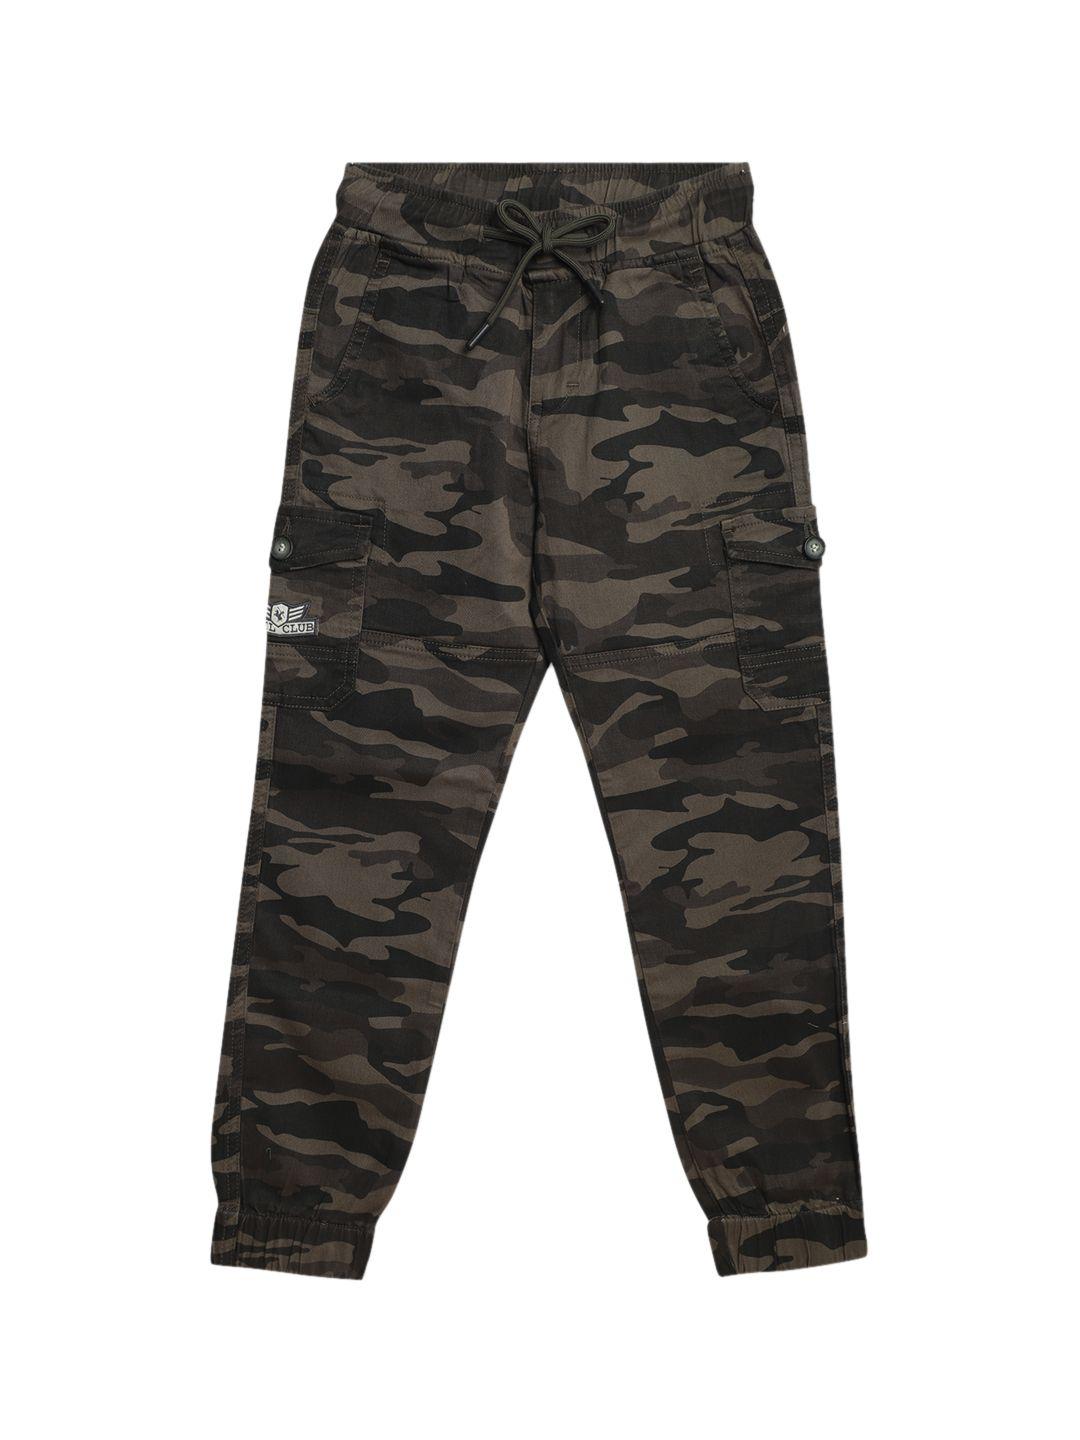 cantabil-boys-olive-green-camouflage-printed-joggers-trousers